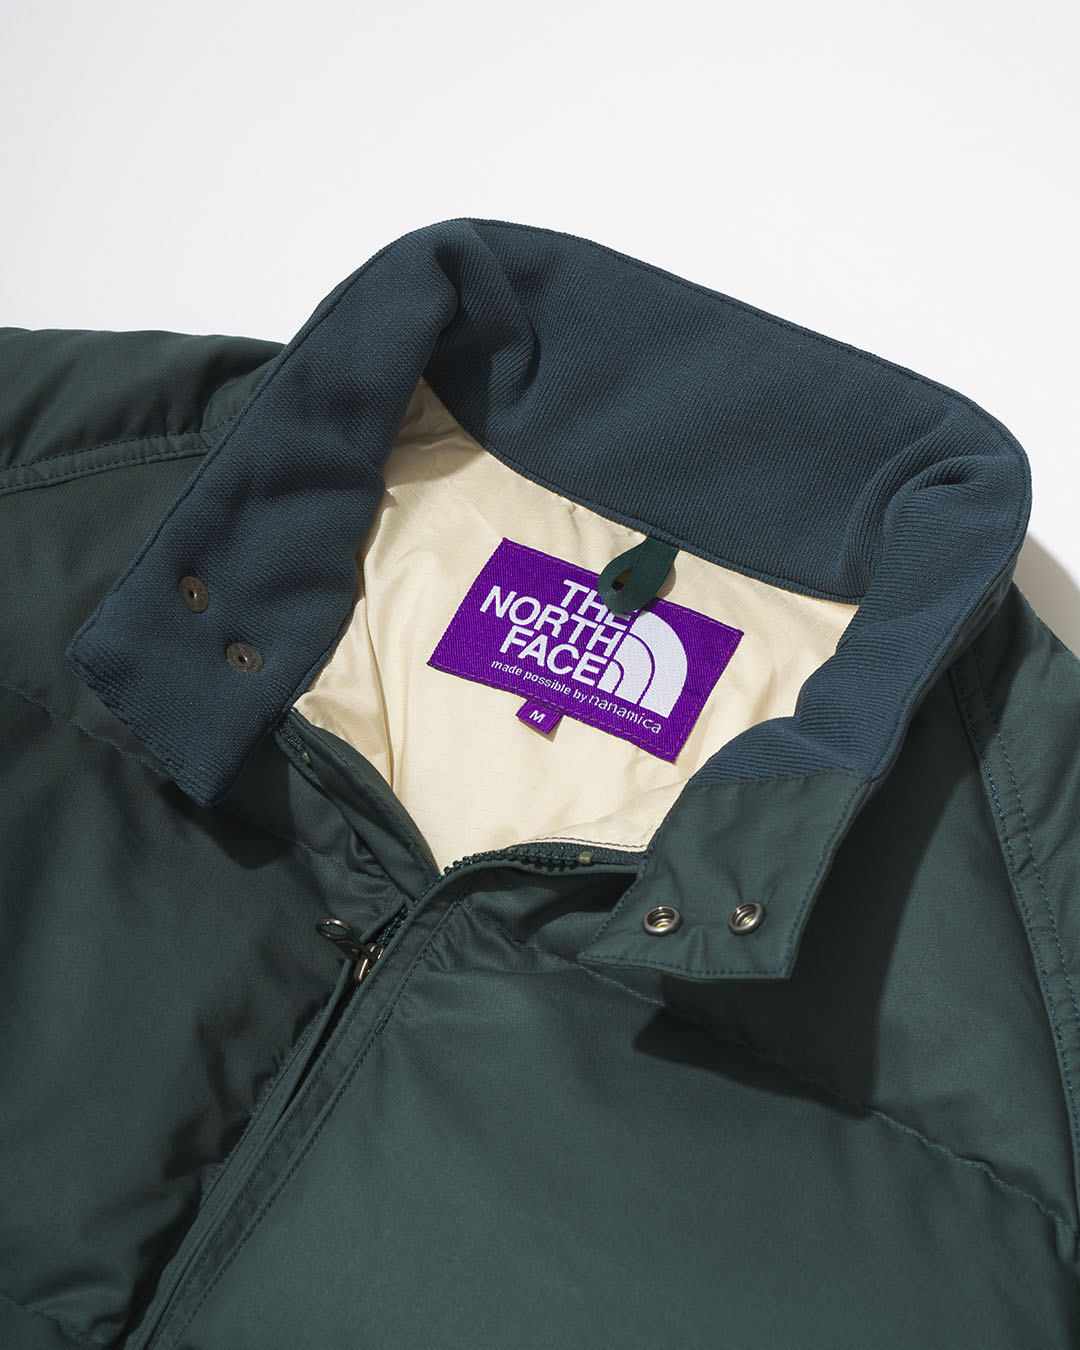 nanamica / THE NORTH FACE PURPLE LABEL / Featured Product vol.38